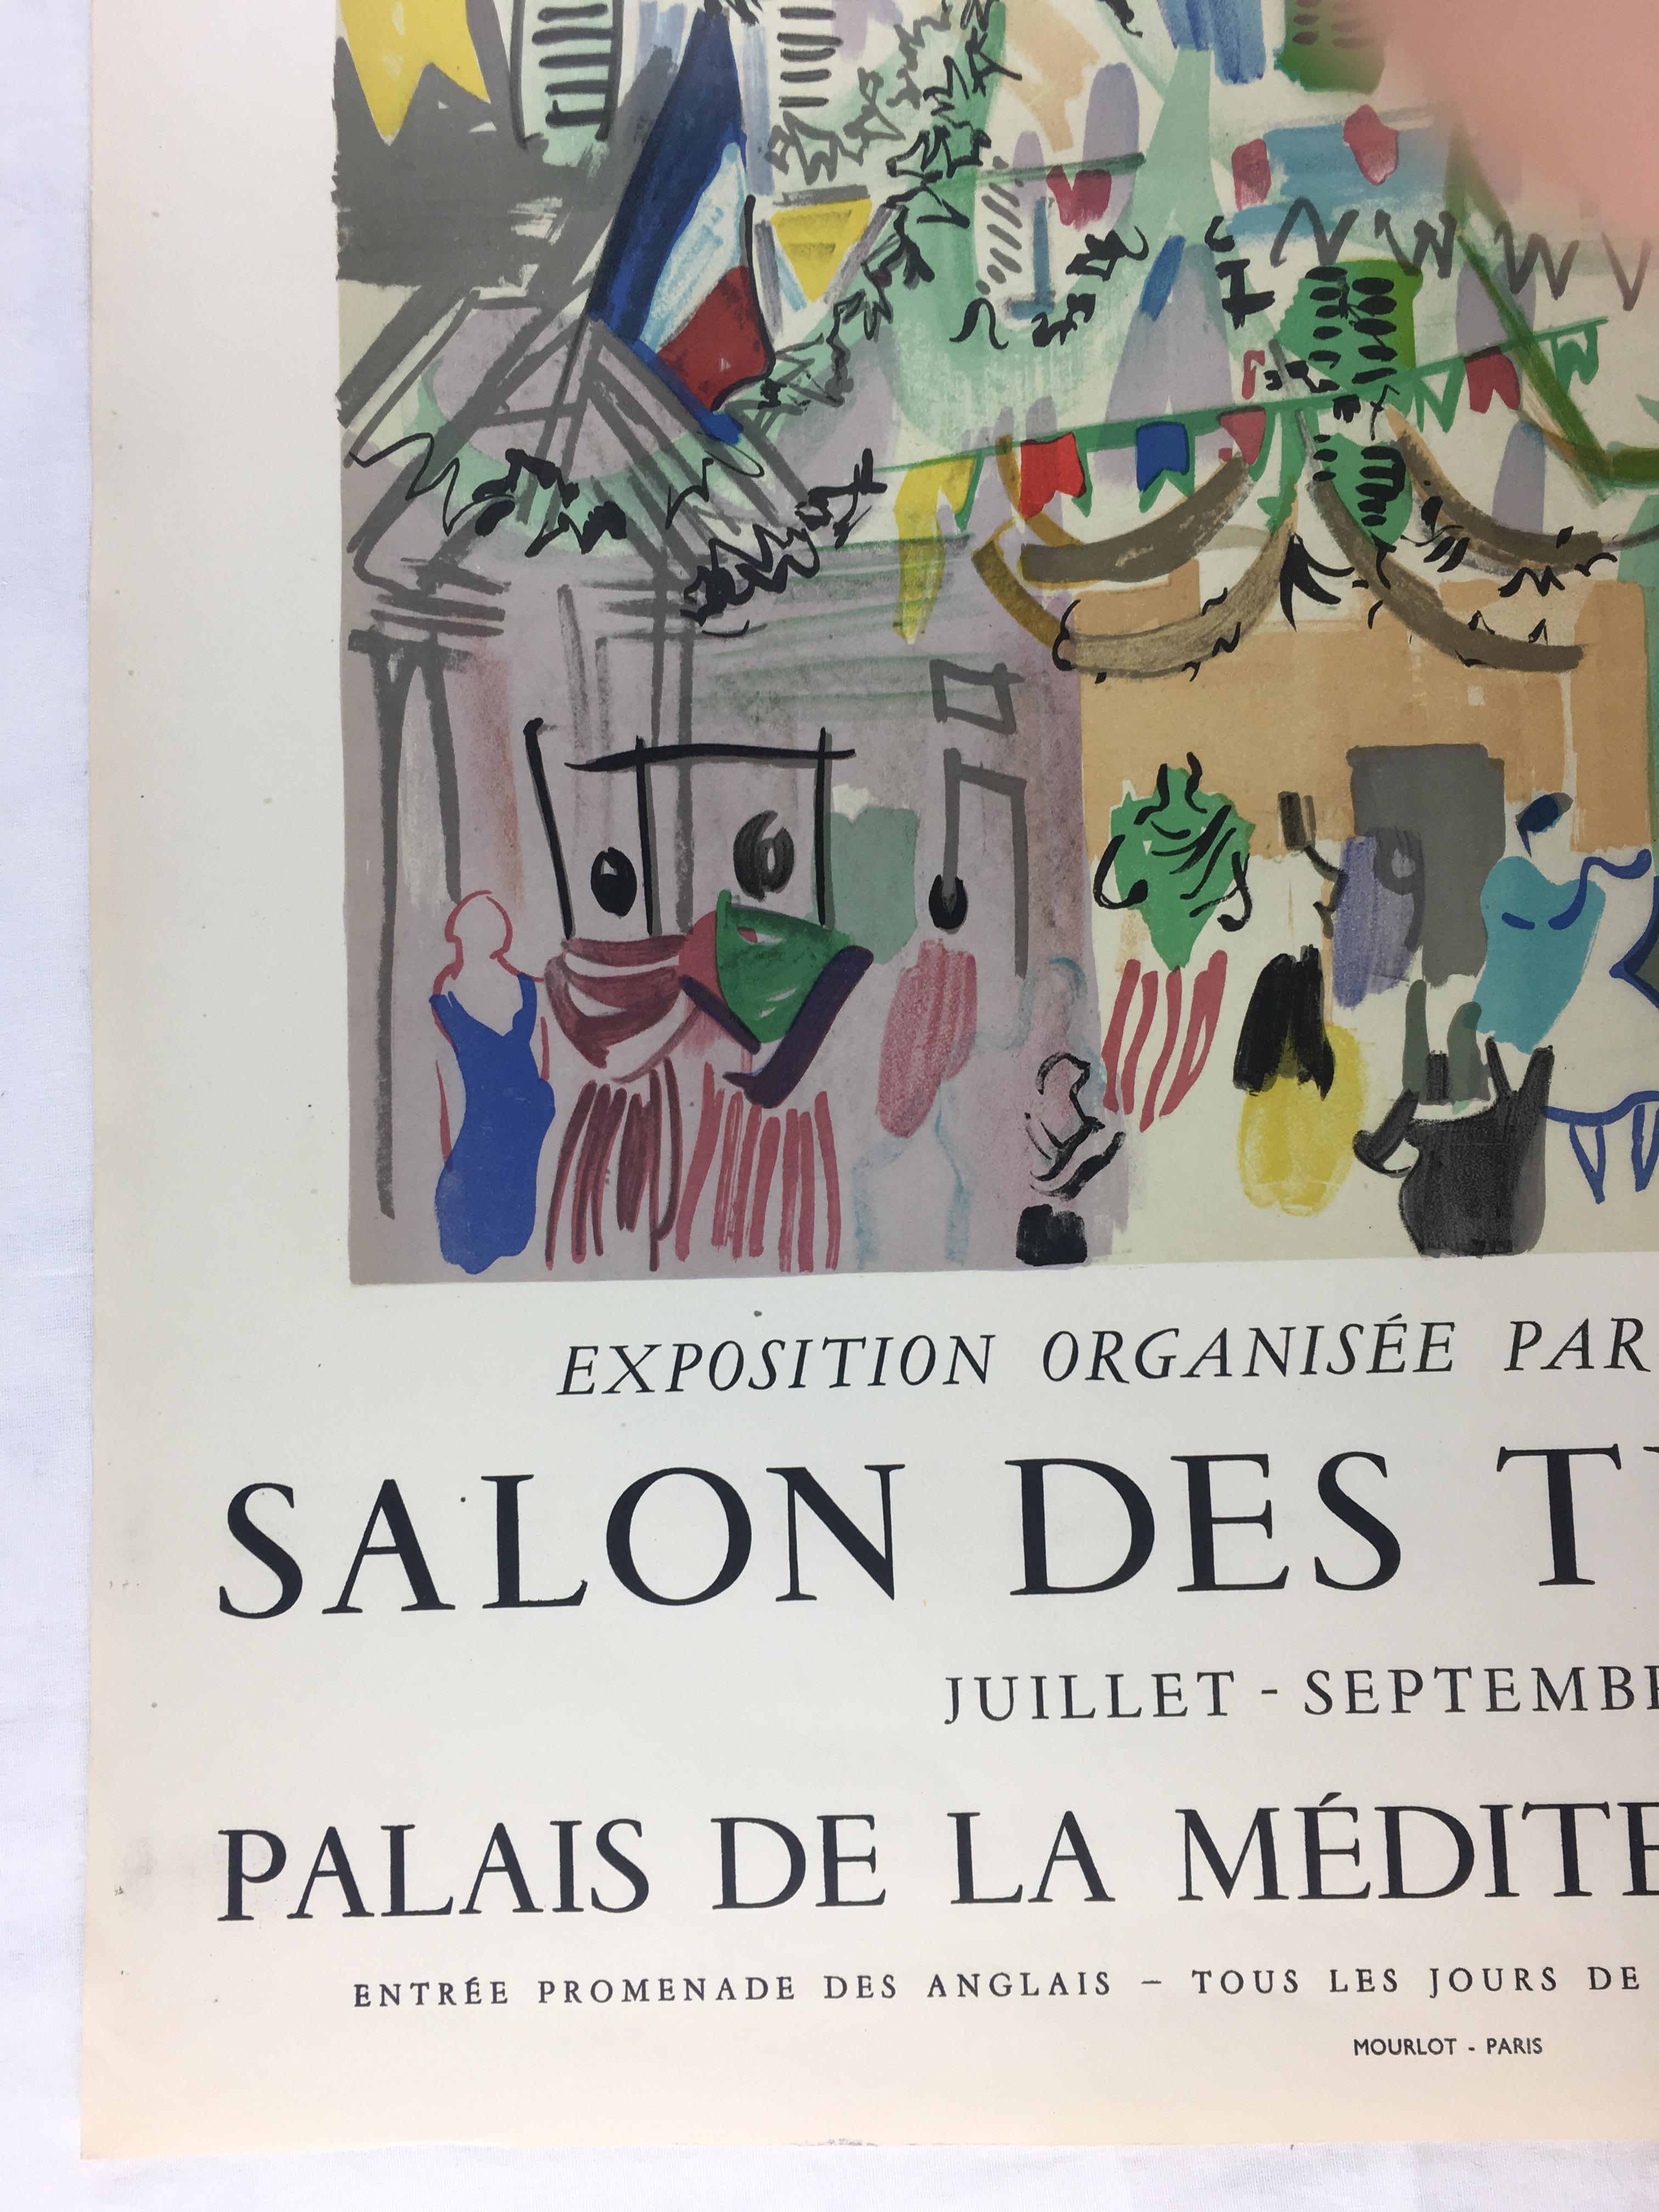 raoul dufy exhibition poster